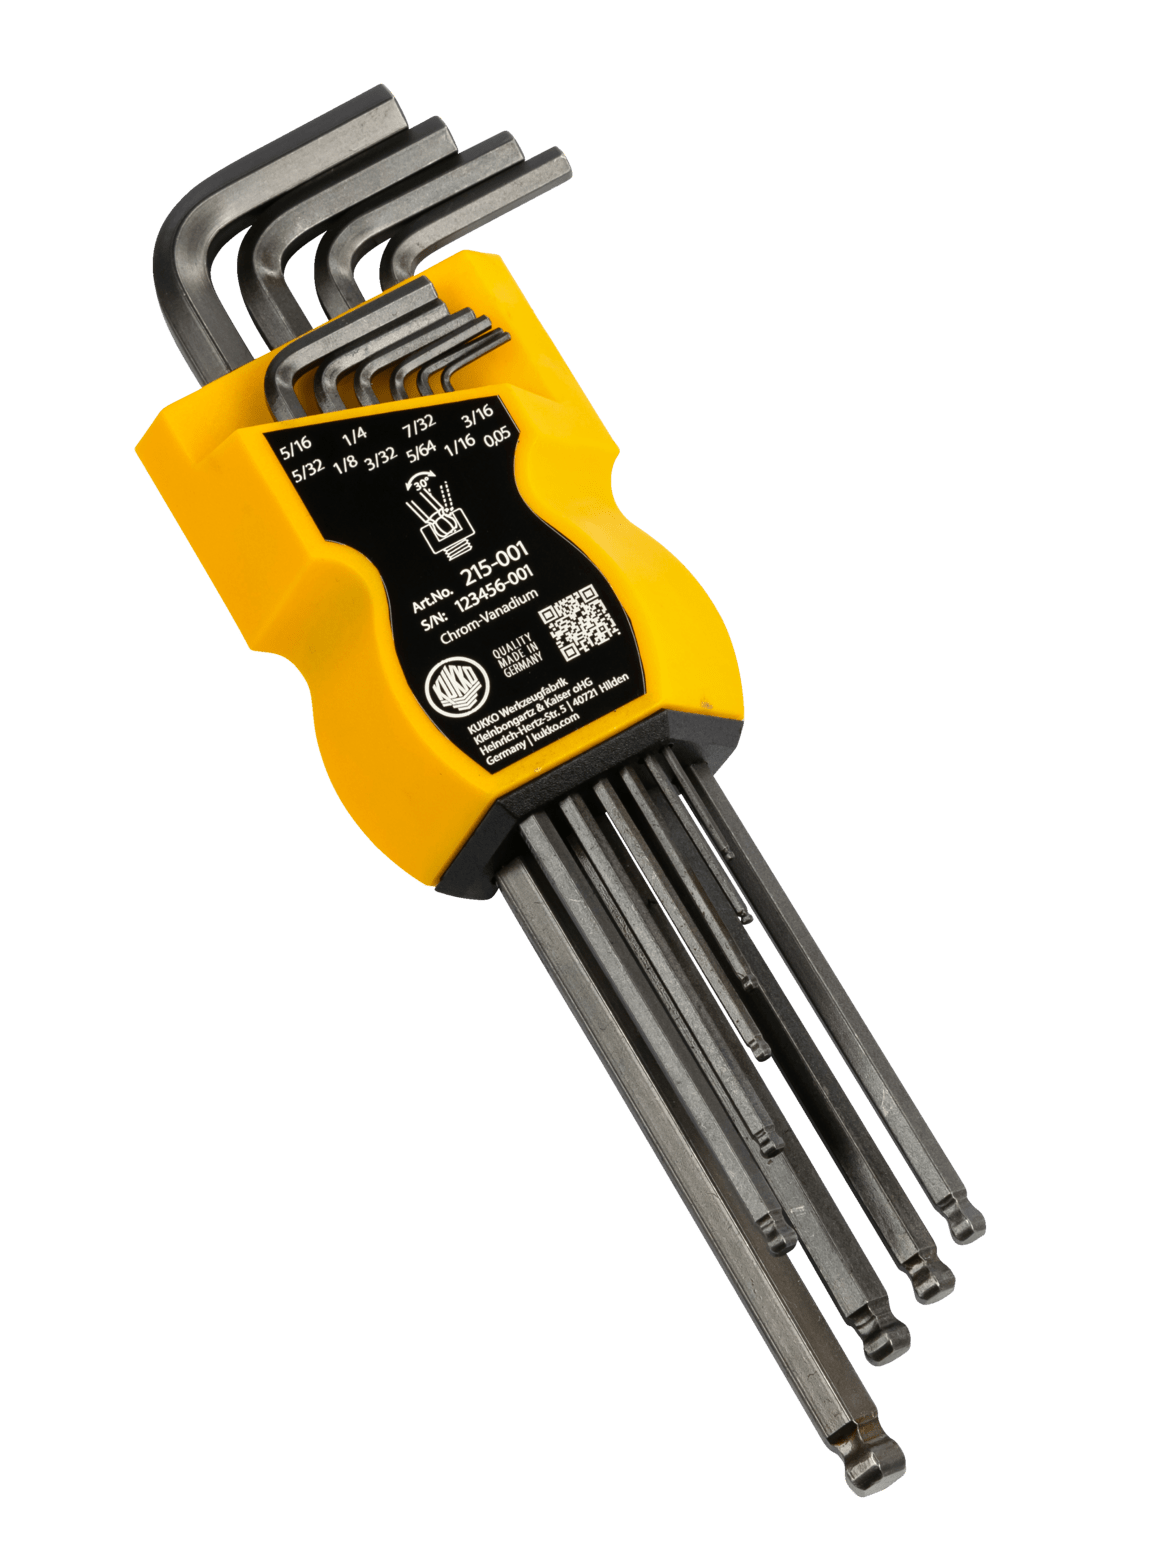 Kukko 215-001 (SAE) Hex key L-wrenches with ball head in TURNUS clip - Apollo Industries llc